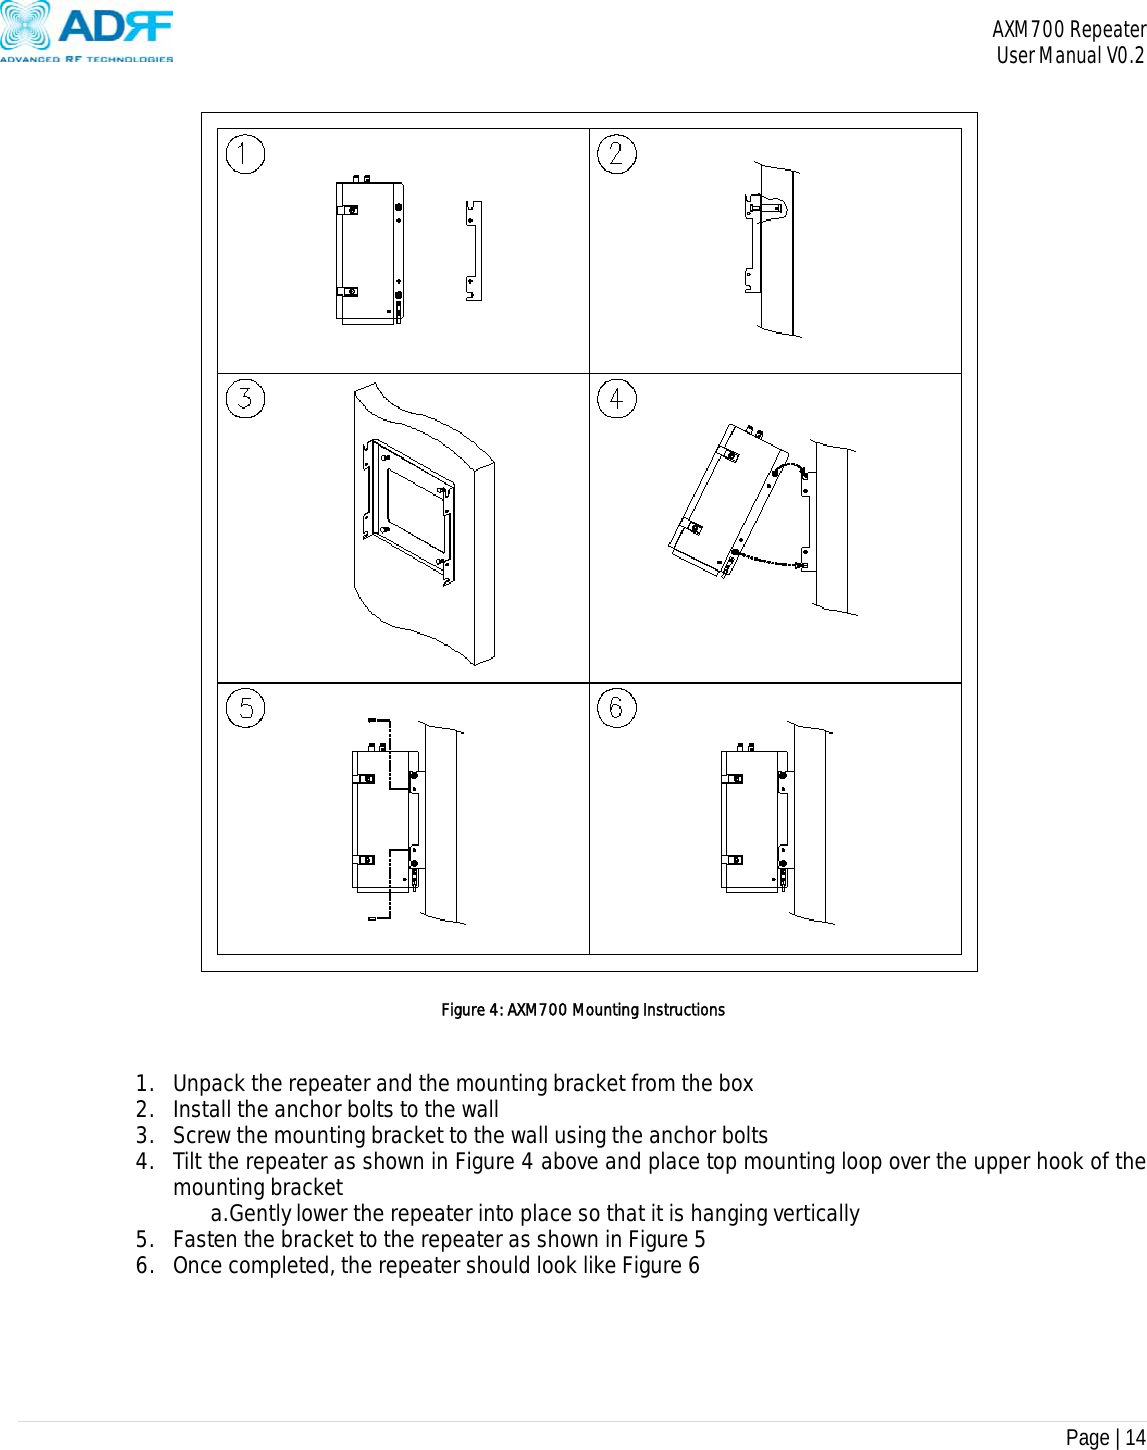 AXM700 Repeater     User Manual V0.2  Page | 14      Figure 4: AXM700 Mounting Instructions   1. Unpack the repeater and the mounting bracket from the box 2. Install the anchor bolts to the wall 3. Screw the mounting bracket to the wall using the anchor bolts 4. Tilt the repeater as shown in Figure 4 above and place top mounting loop over the upper hook of the mounting bracket a. Gently lower the repeater into place so that it is hanging vertically 5. Fasten the bracket to the repeater as shown in Figure 5 6. Once completed, the repeater should look like Figure 6     